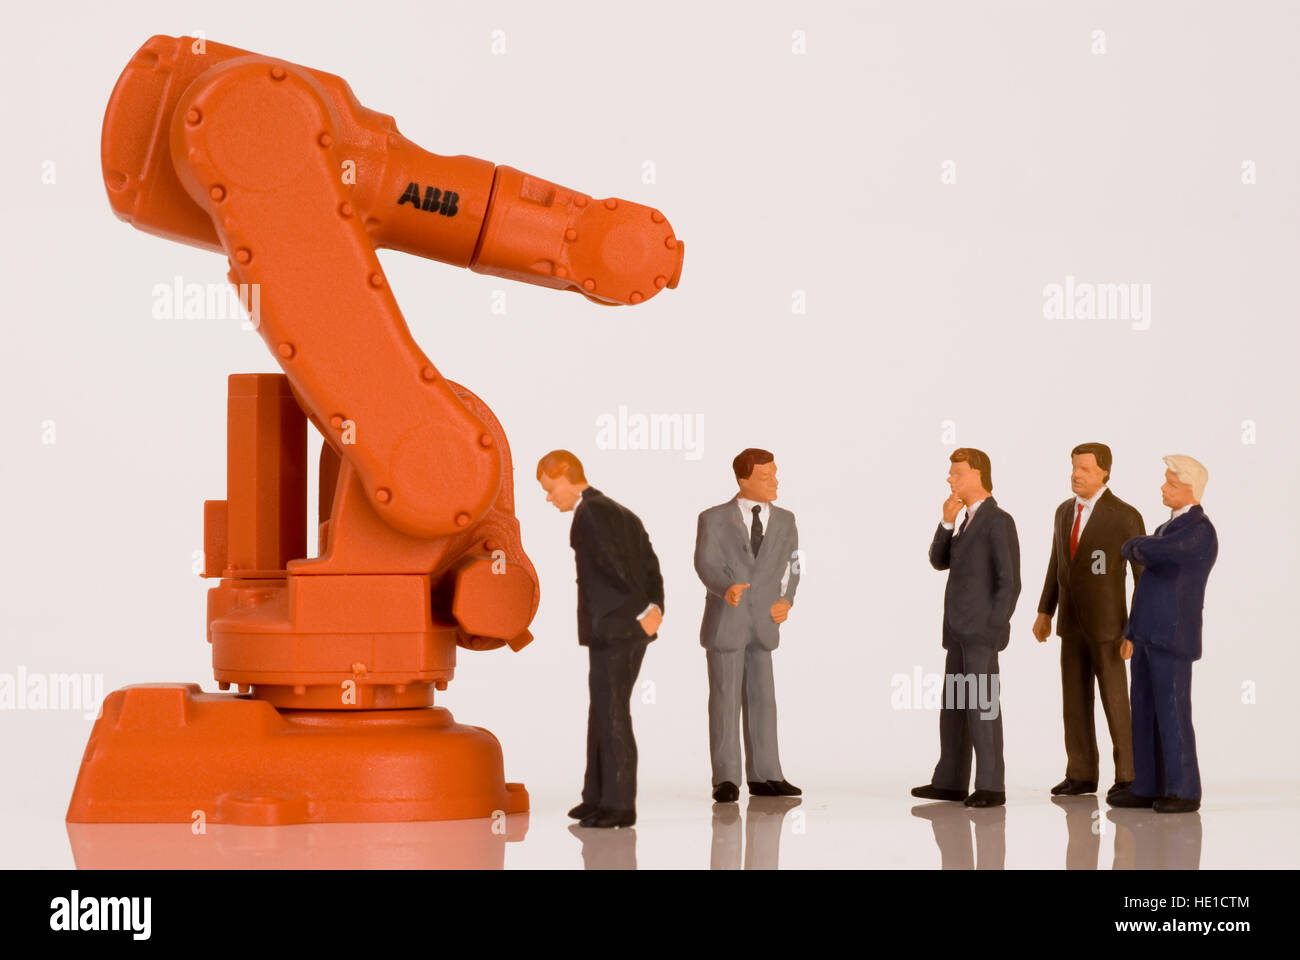 Industrial robot and business executives Stock Photo